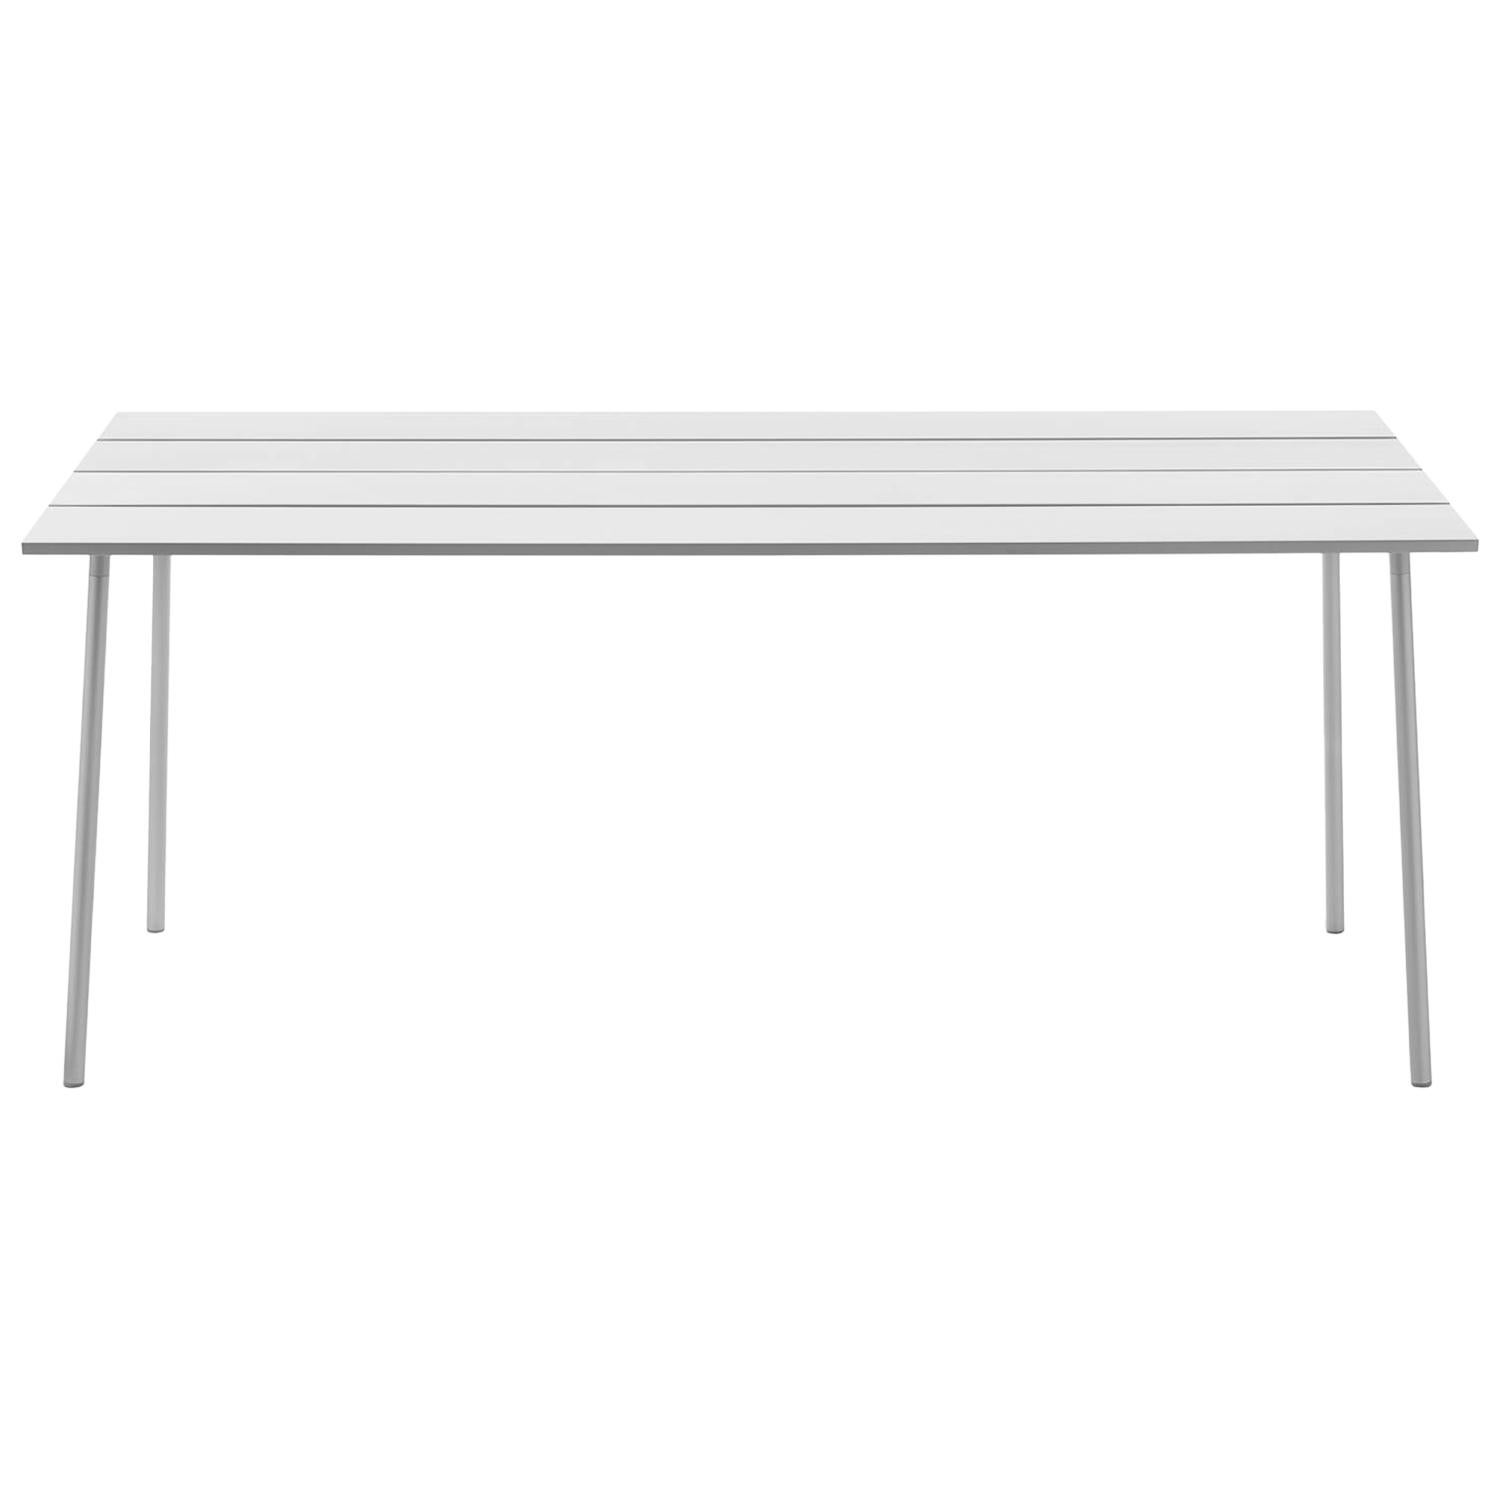 Emeco Run XL High Table in Clear Anodized Aluminum by Sam Hecht + Kim Colin